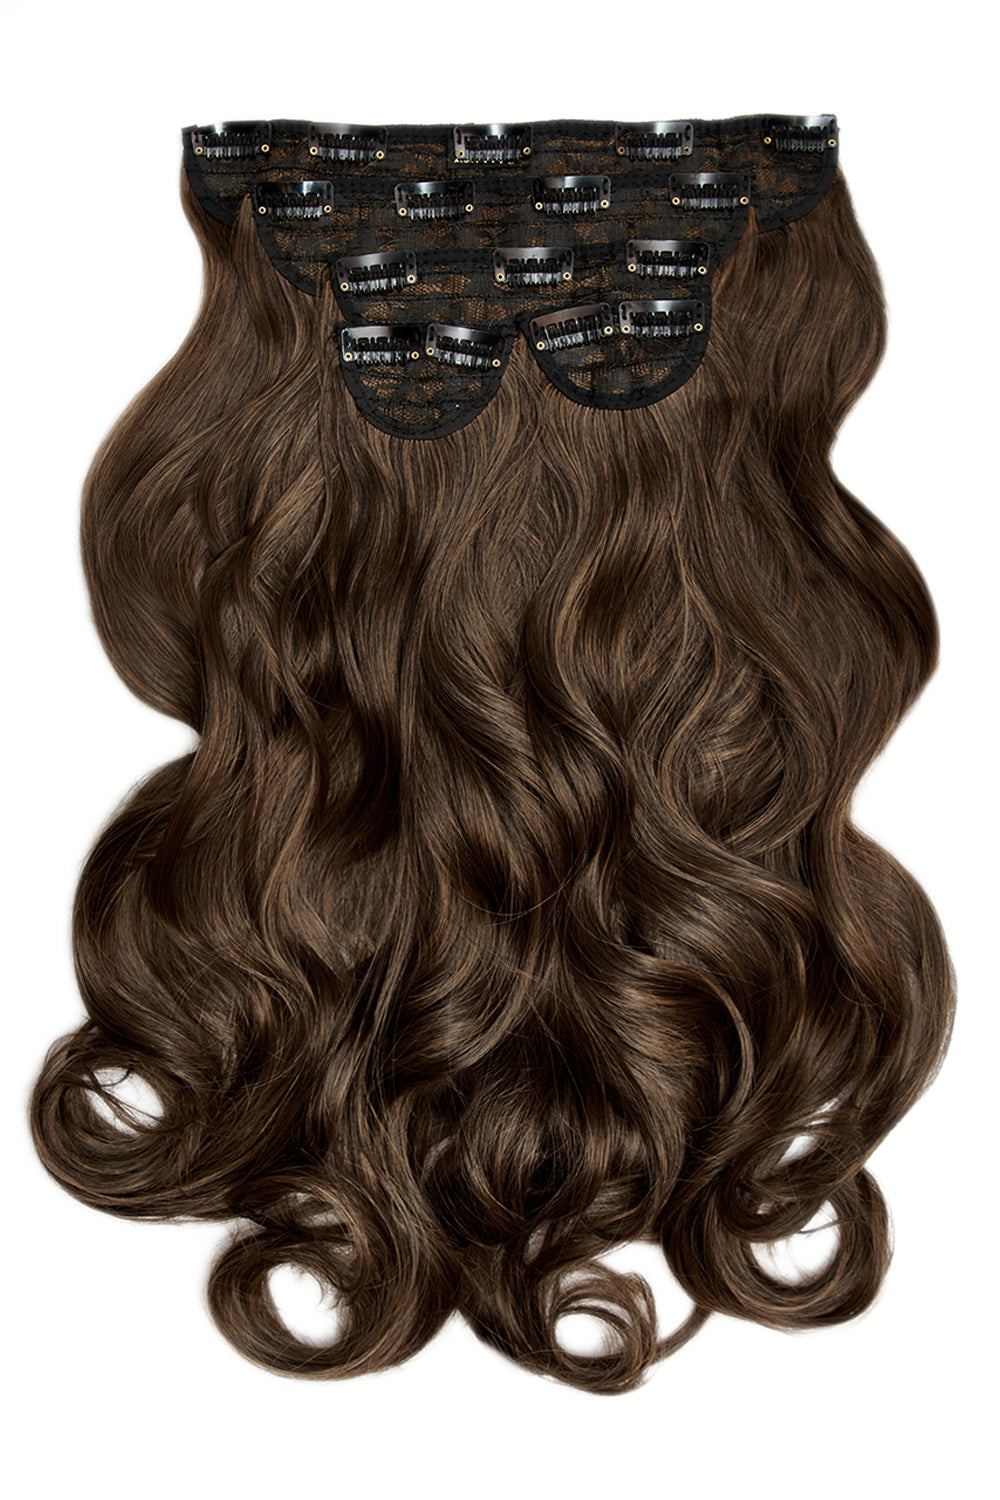 Super Thick 22" 5 Piece Curly Clip In Hair Extensions - Dark Brown & Caramel